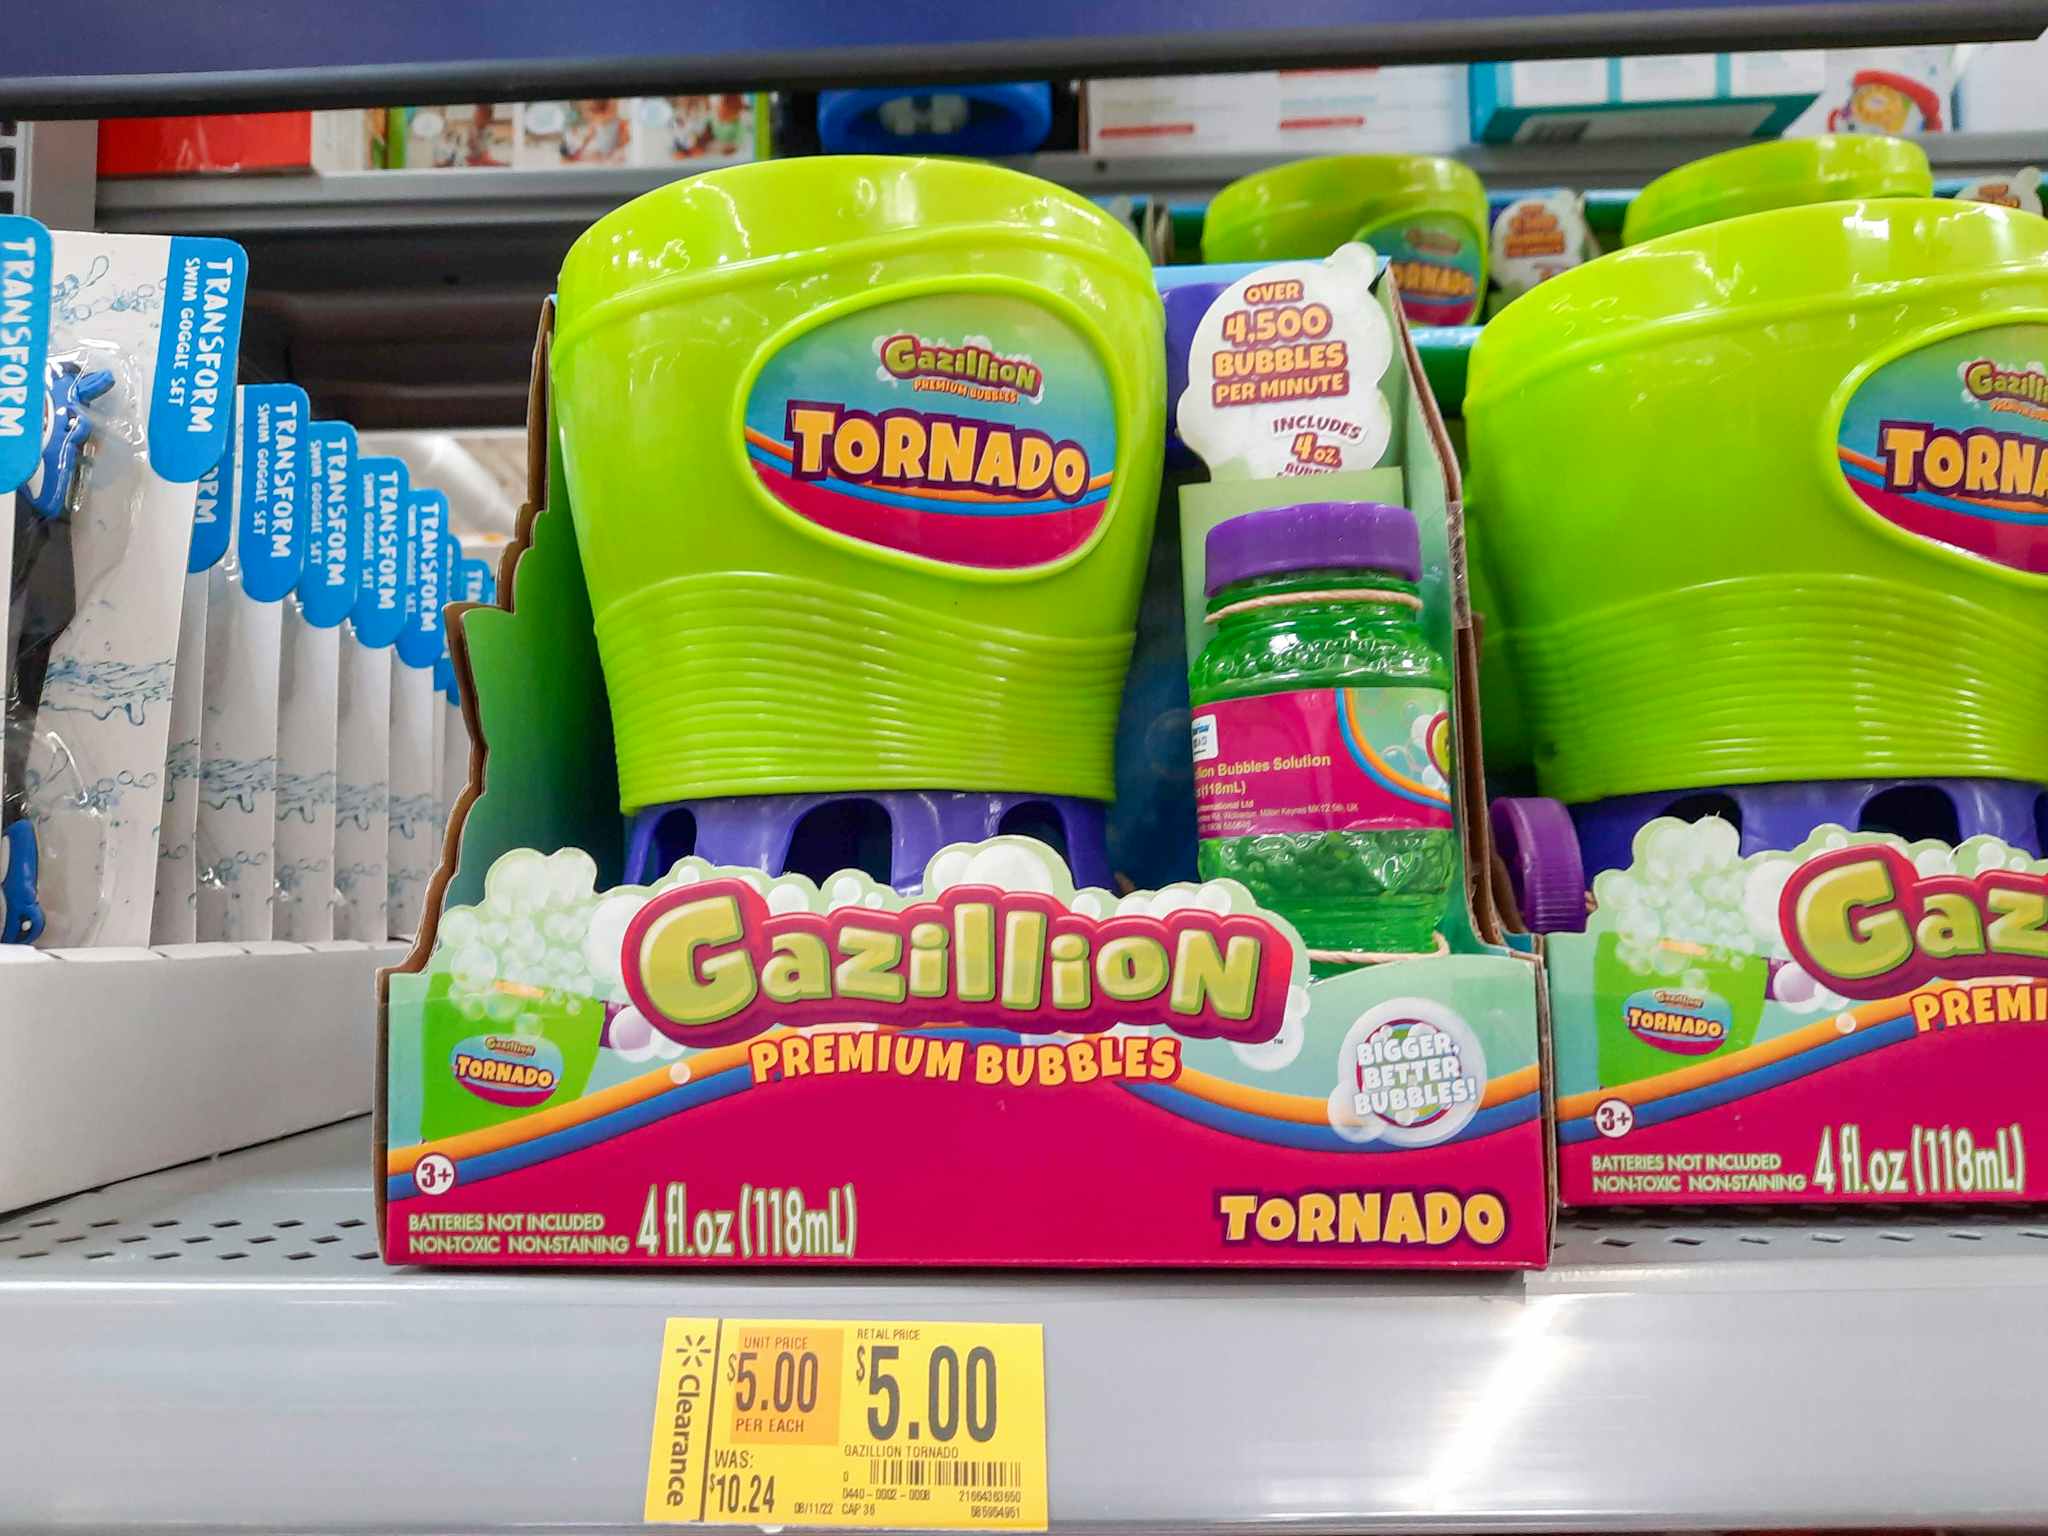 Gazillion Bubble Tornado toy on shelf at Walmart. Clearance tag in front of the product reads $5, regularly $10.24.